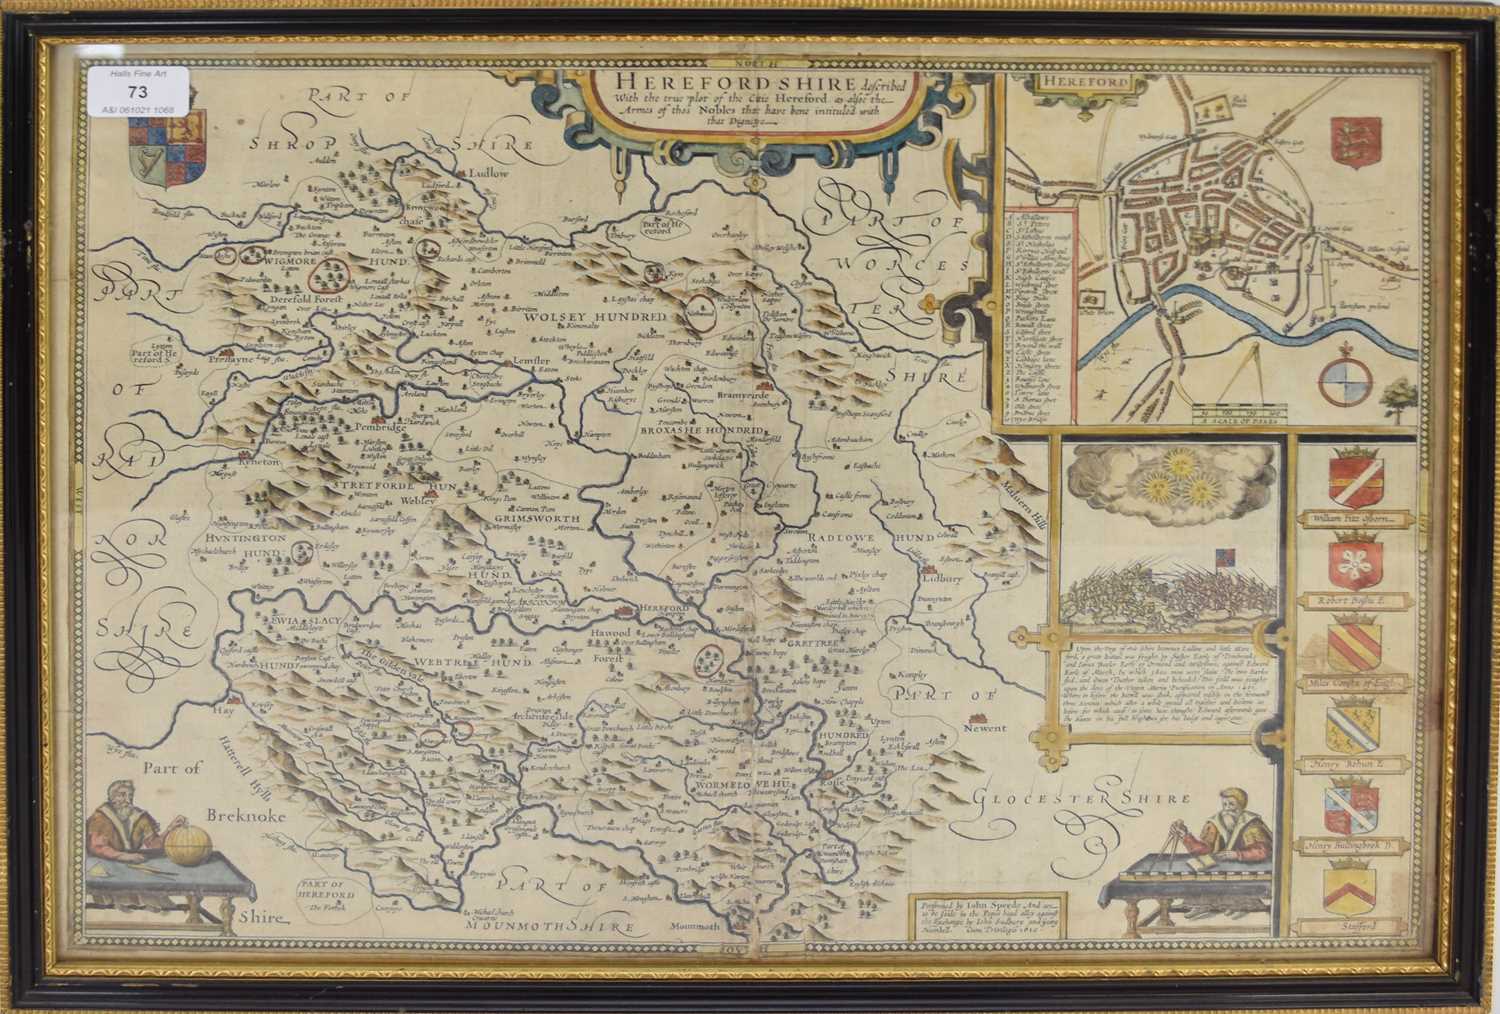 Lot 73 - SPEED, John, Map of Herefordshire